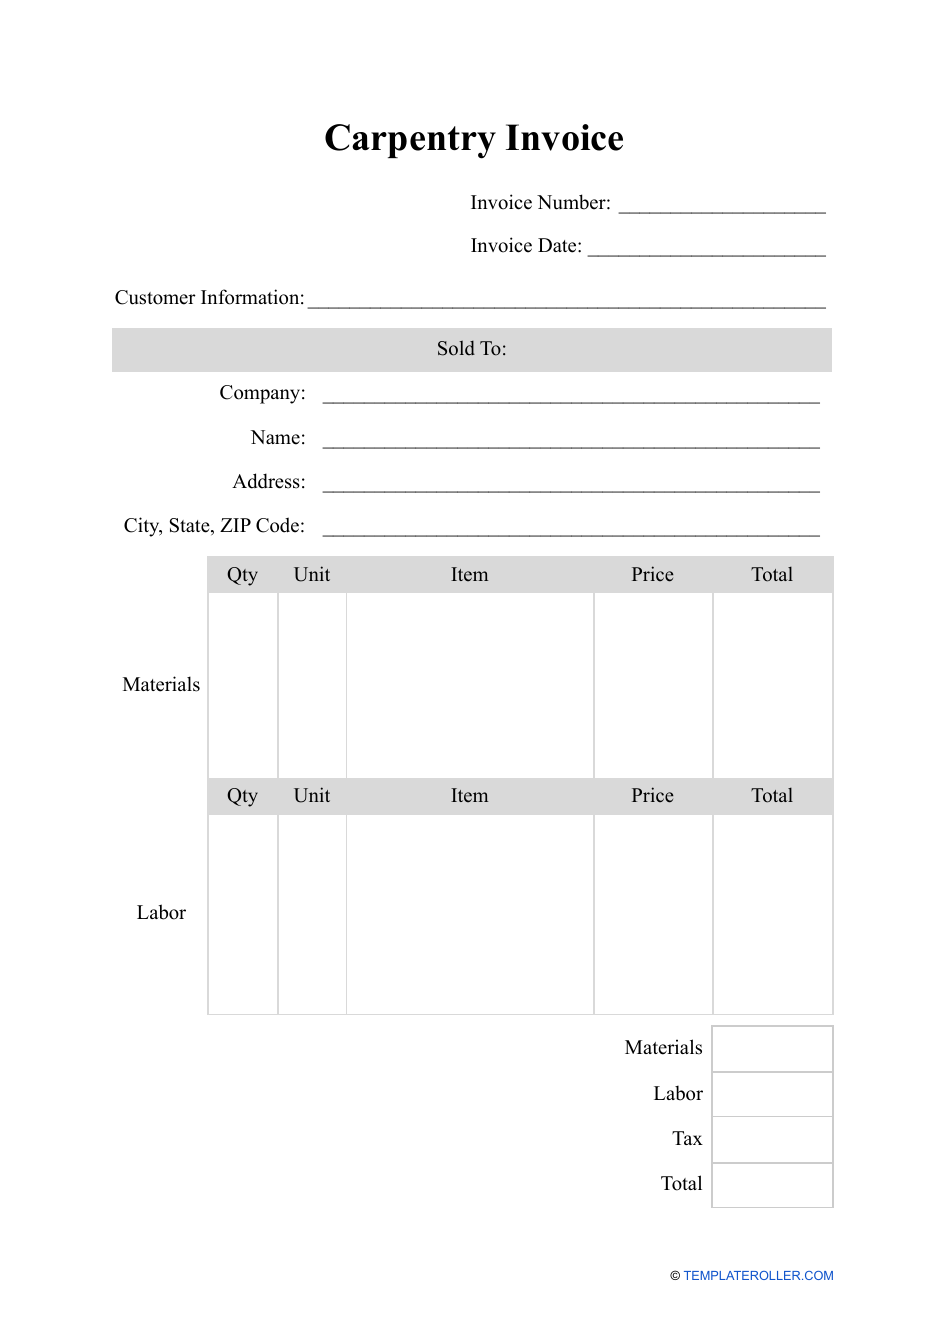 Carpentry Invoice Template, Page 1